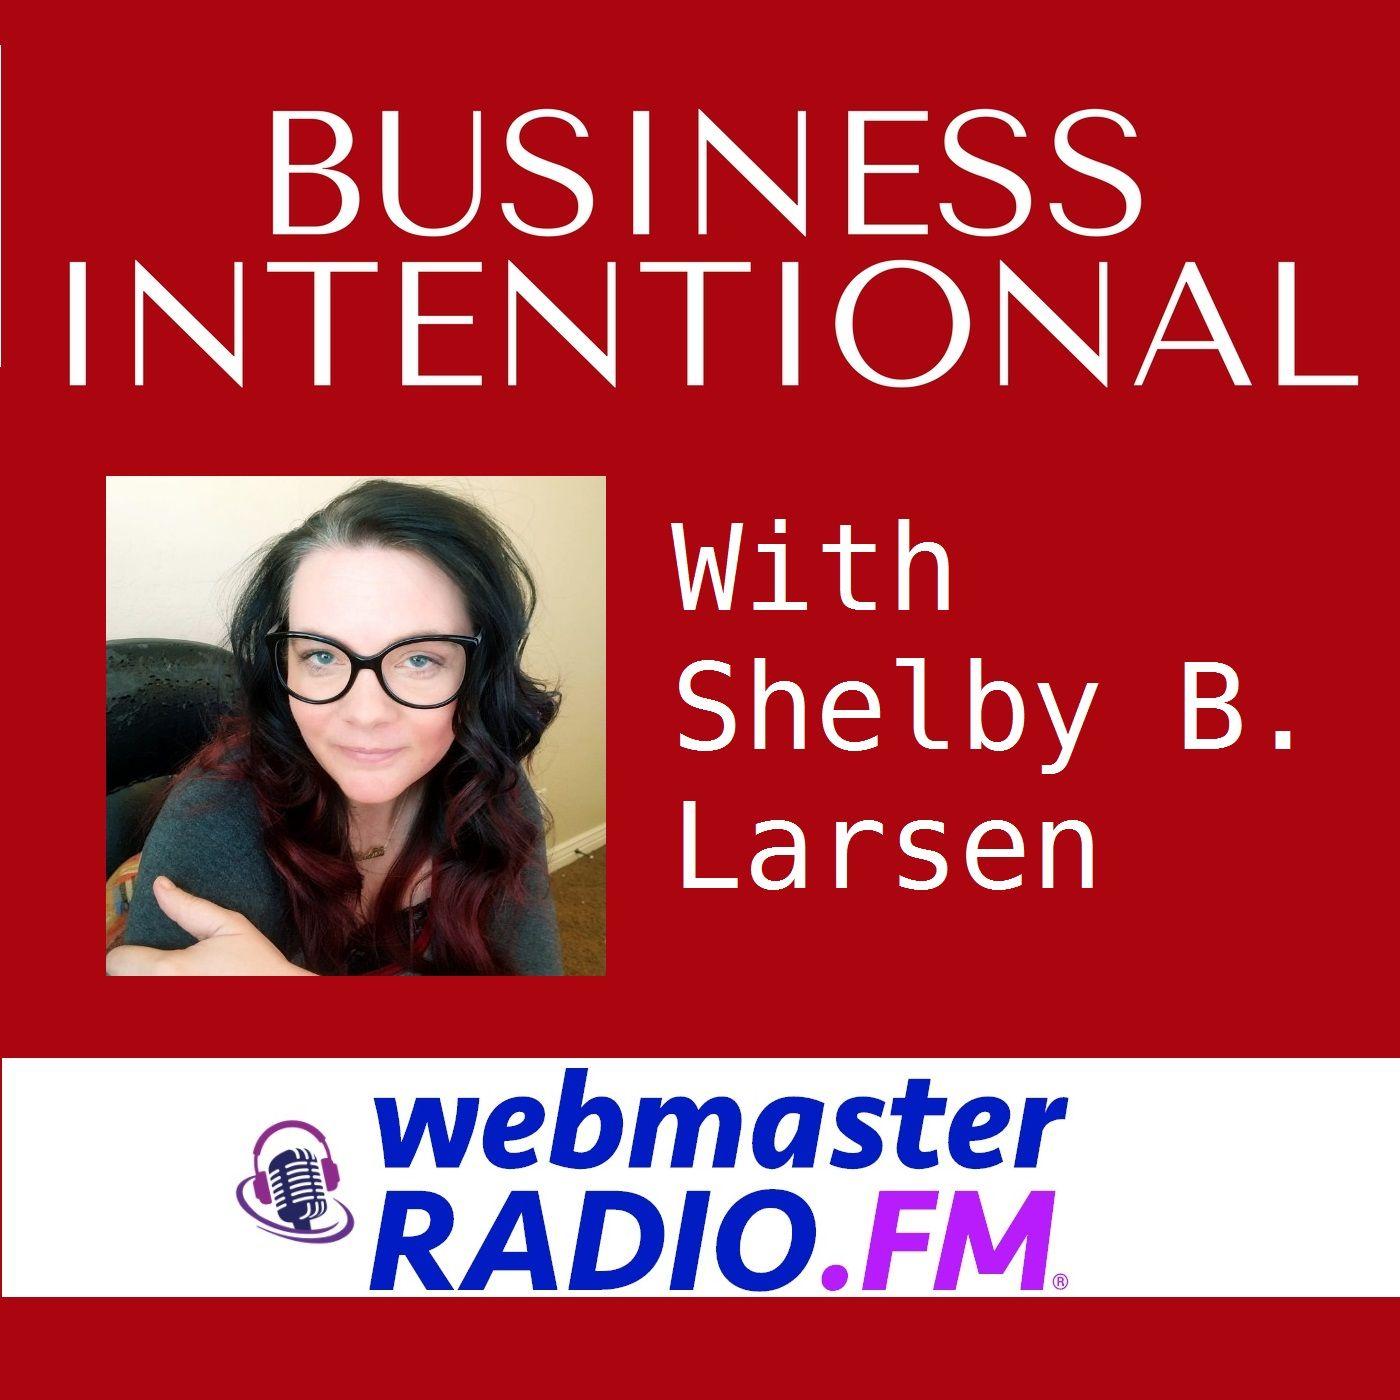 Business Intentional with Shelby Larson